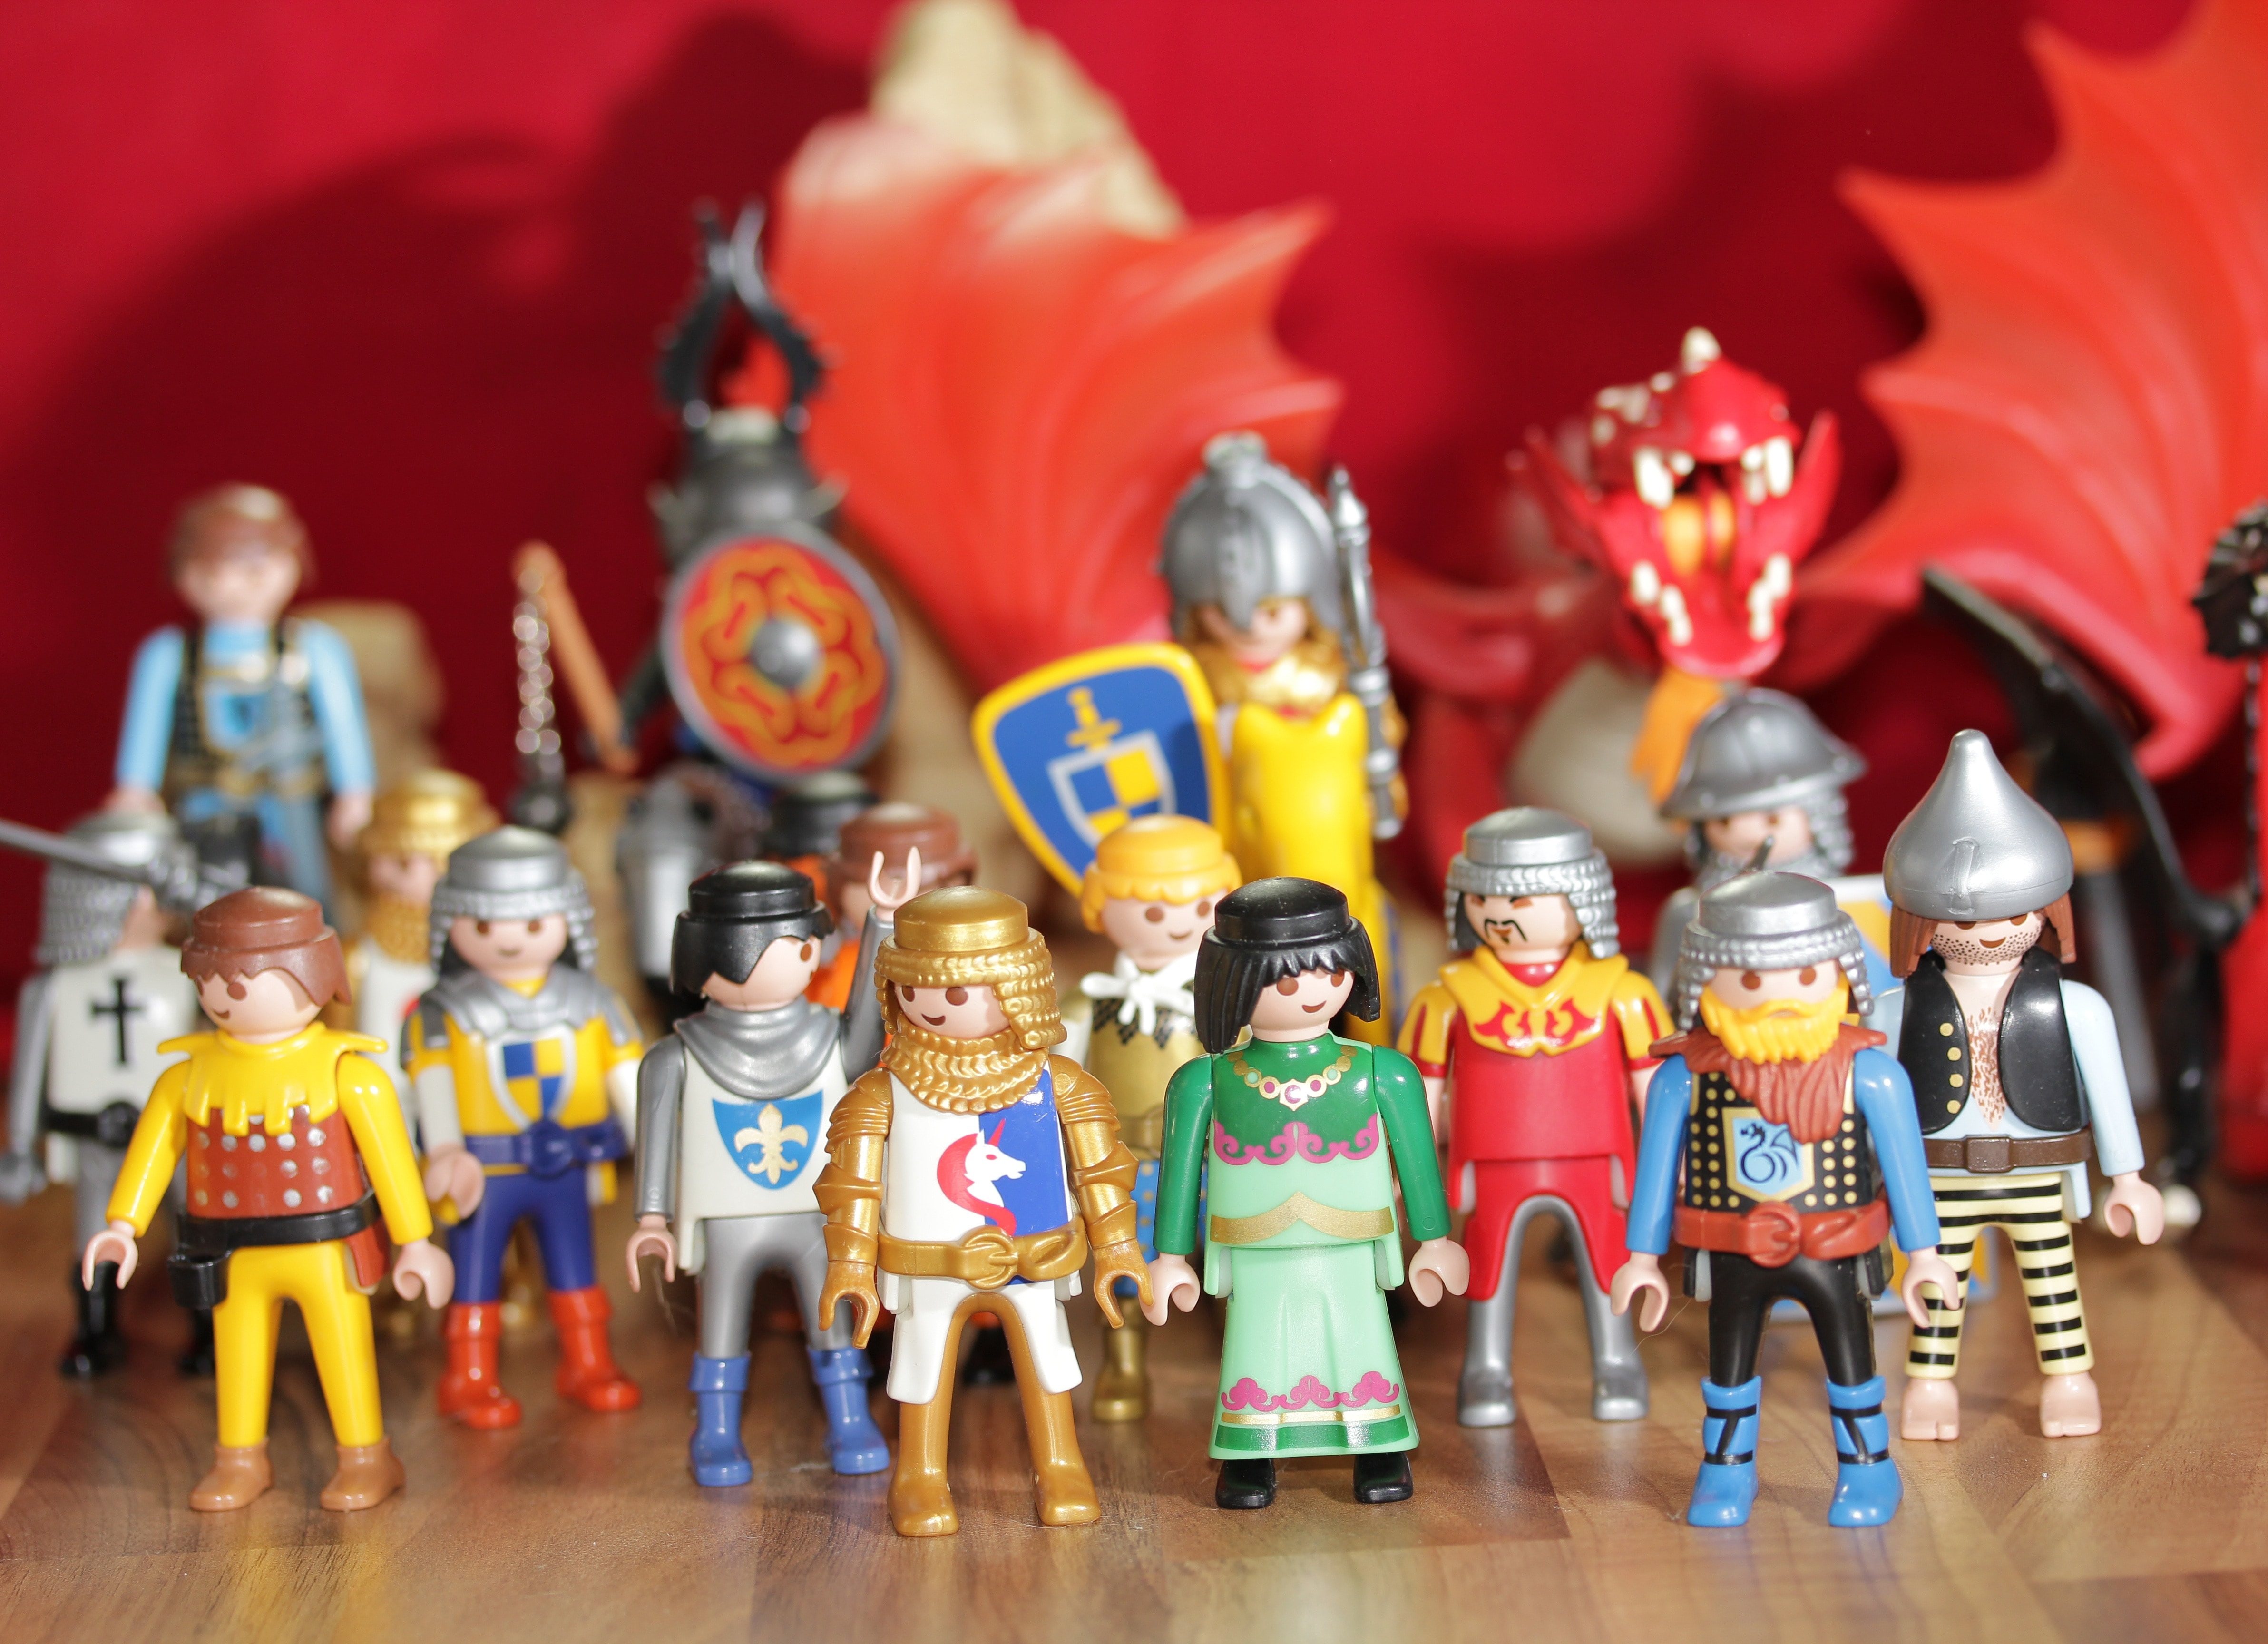 solder lego toy collections in shallow focus photography